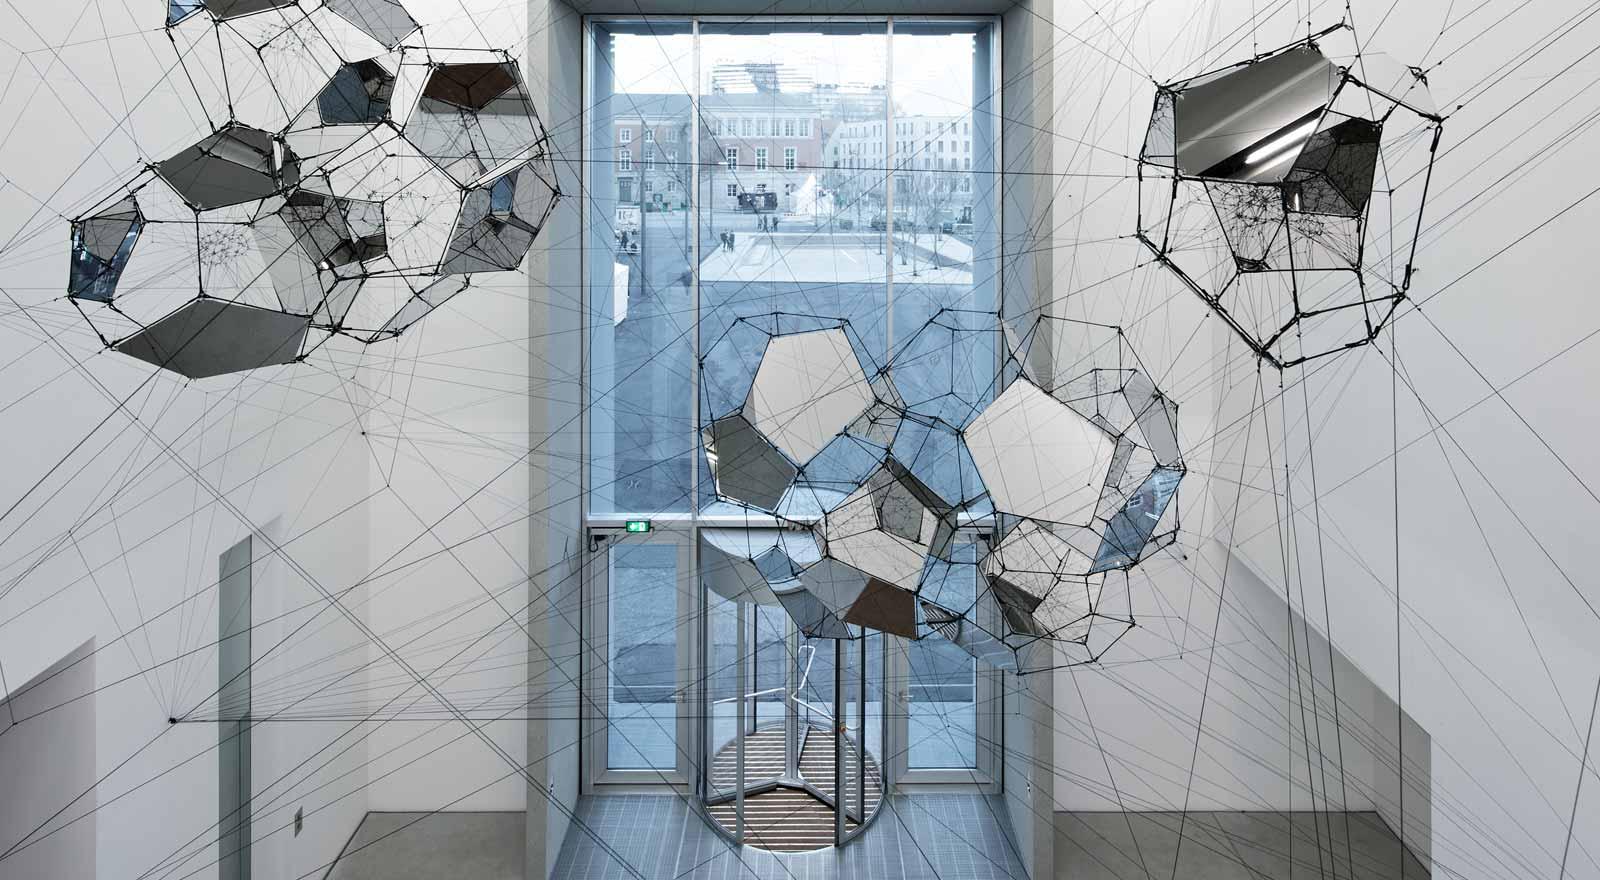 Tomás Saraceno's Sundial for Spatial Echoes in the foyer of the Bauhaus Museum Weimar